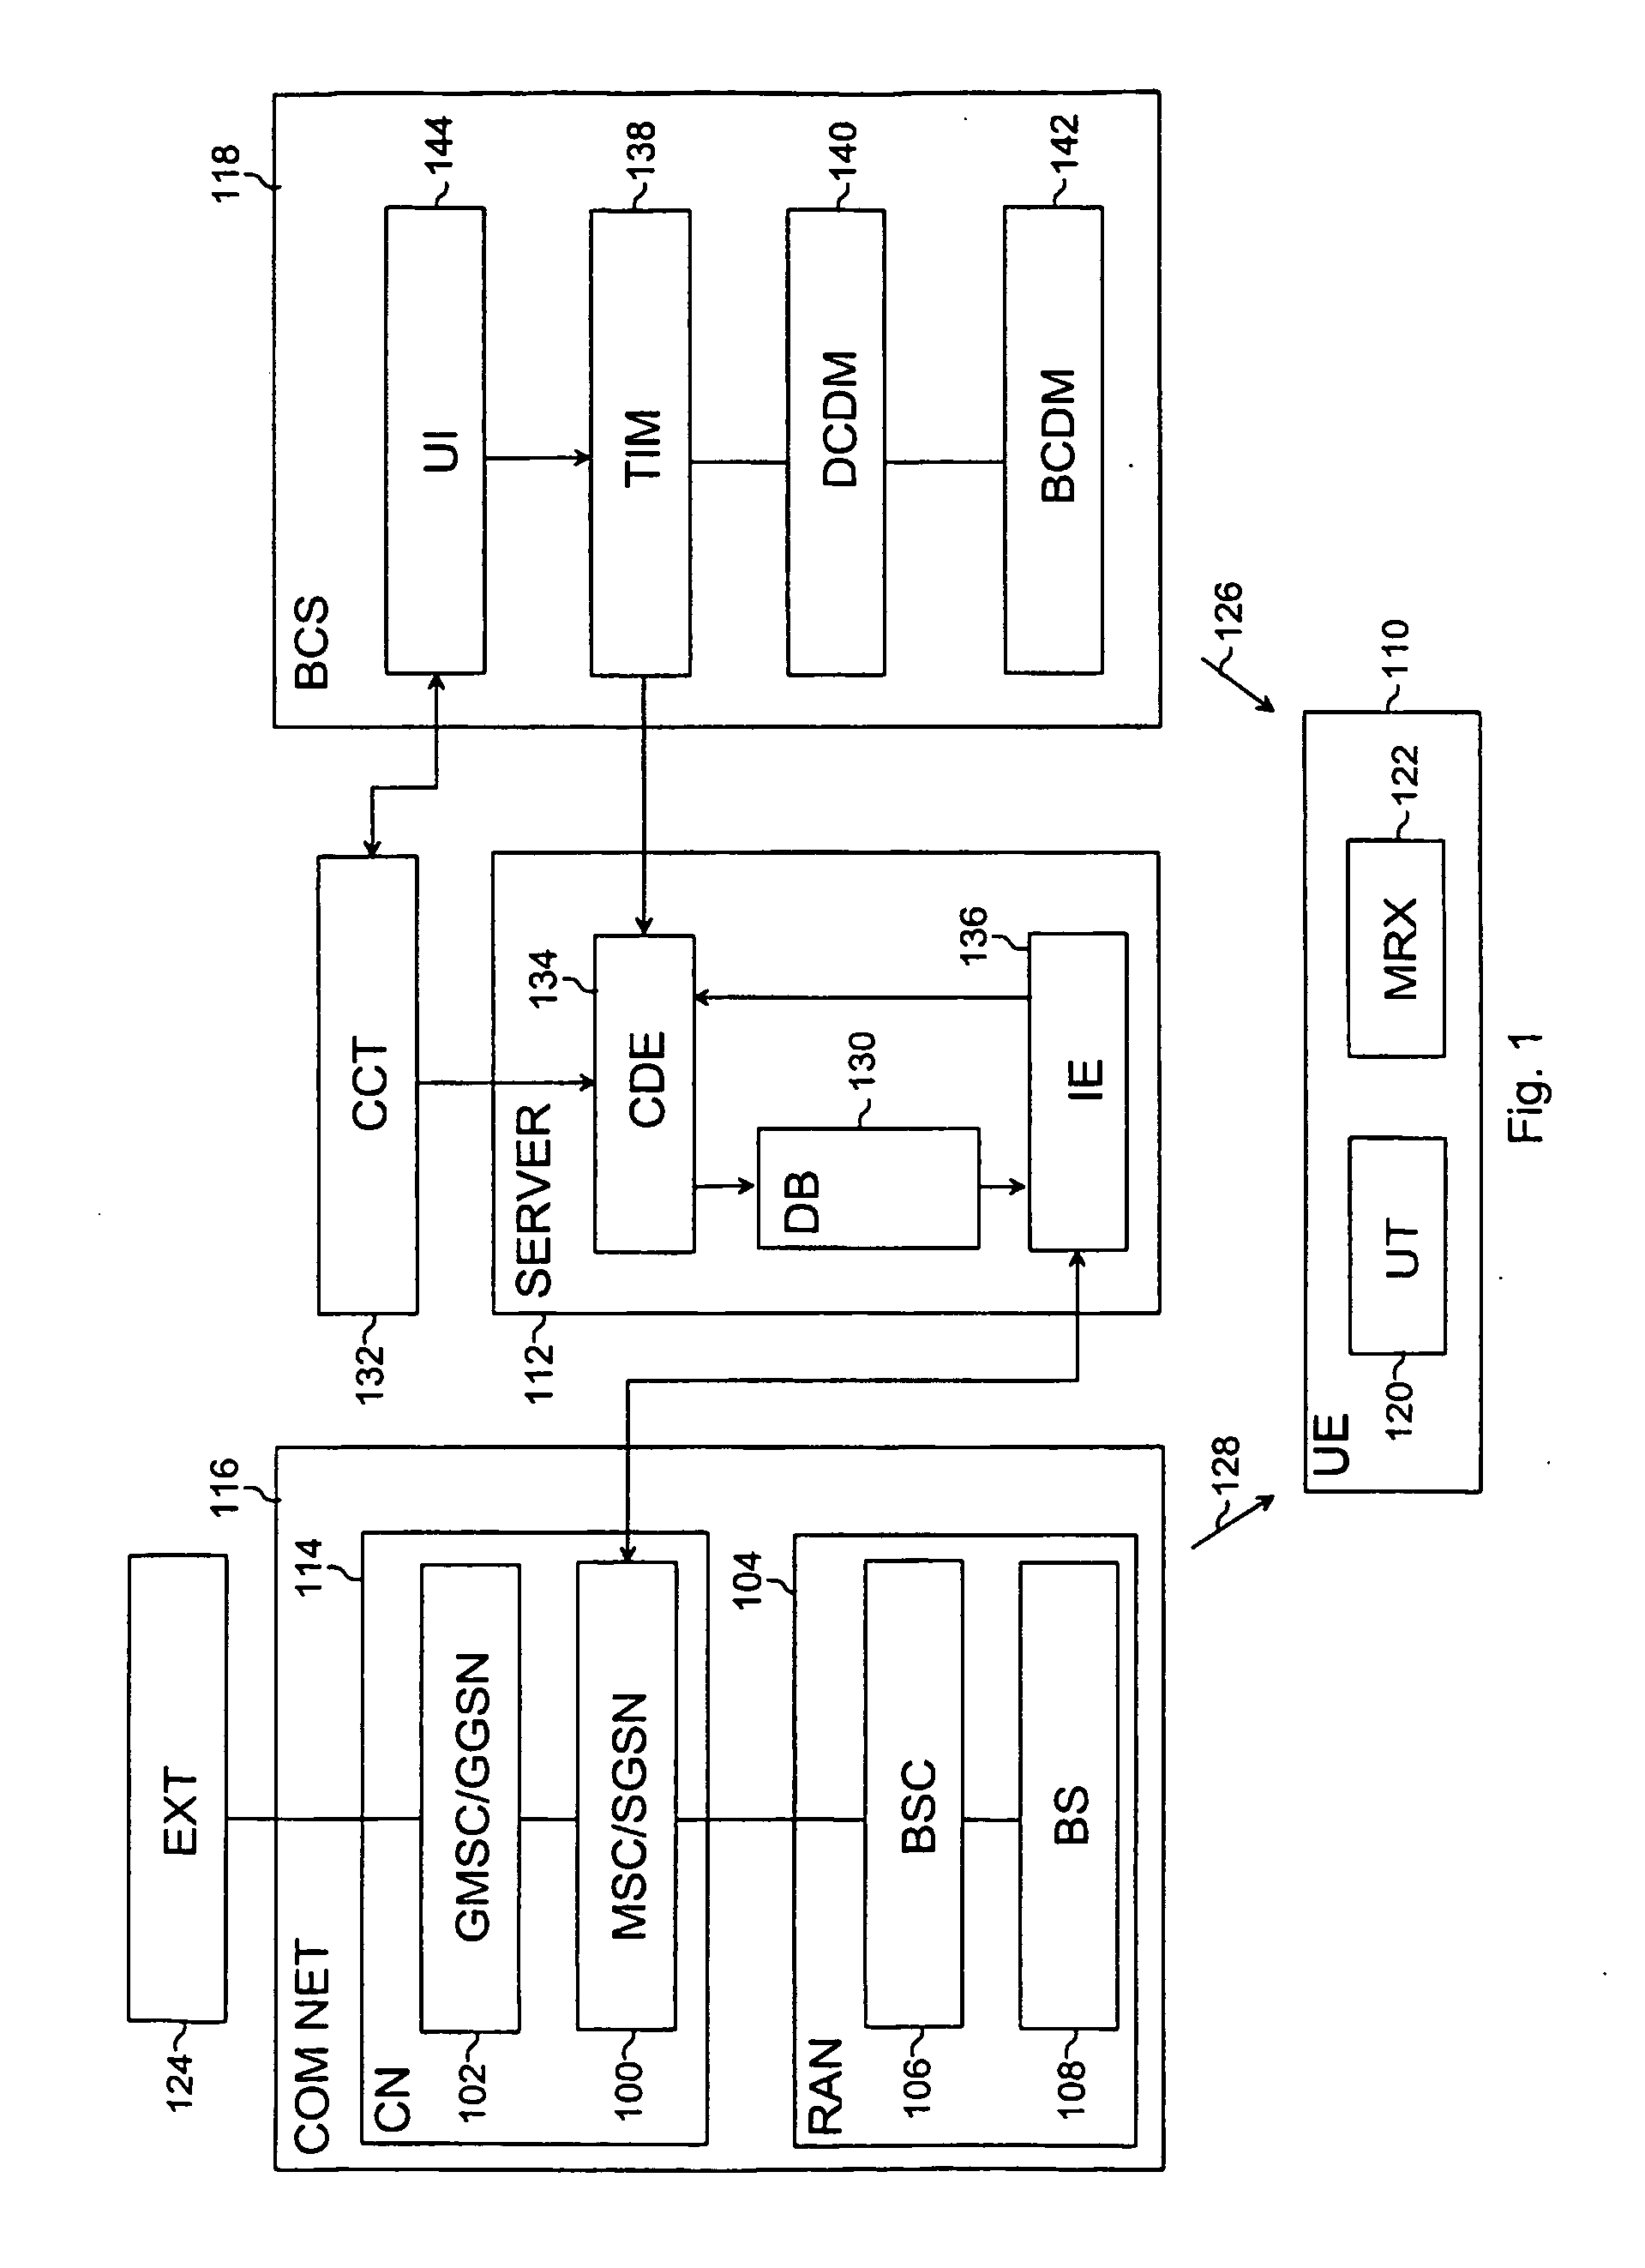 Method of providing service for user equipment and system